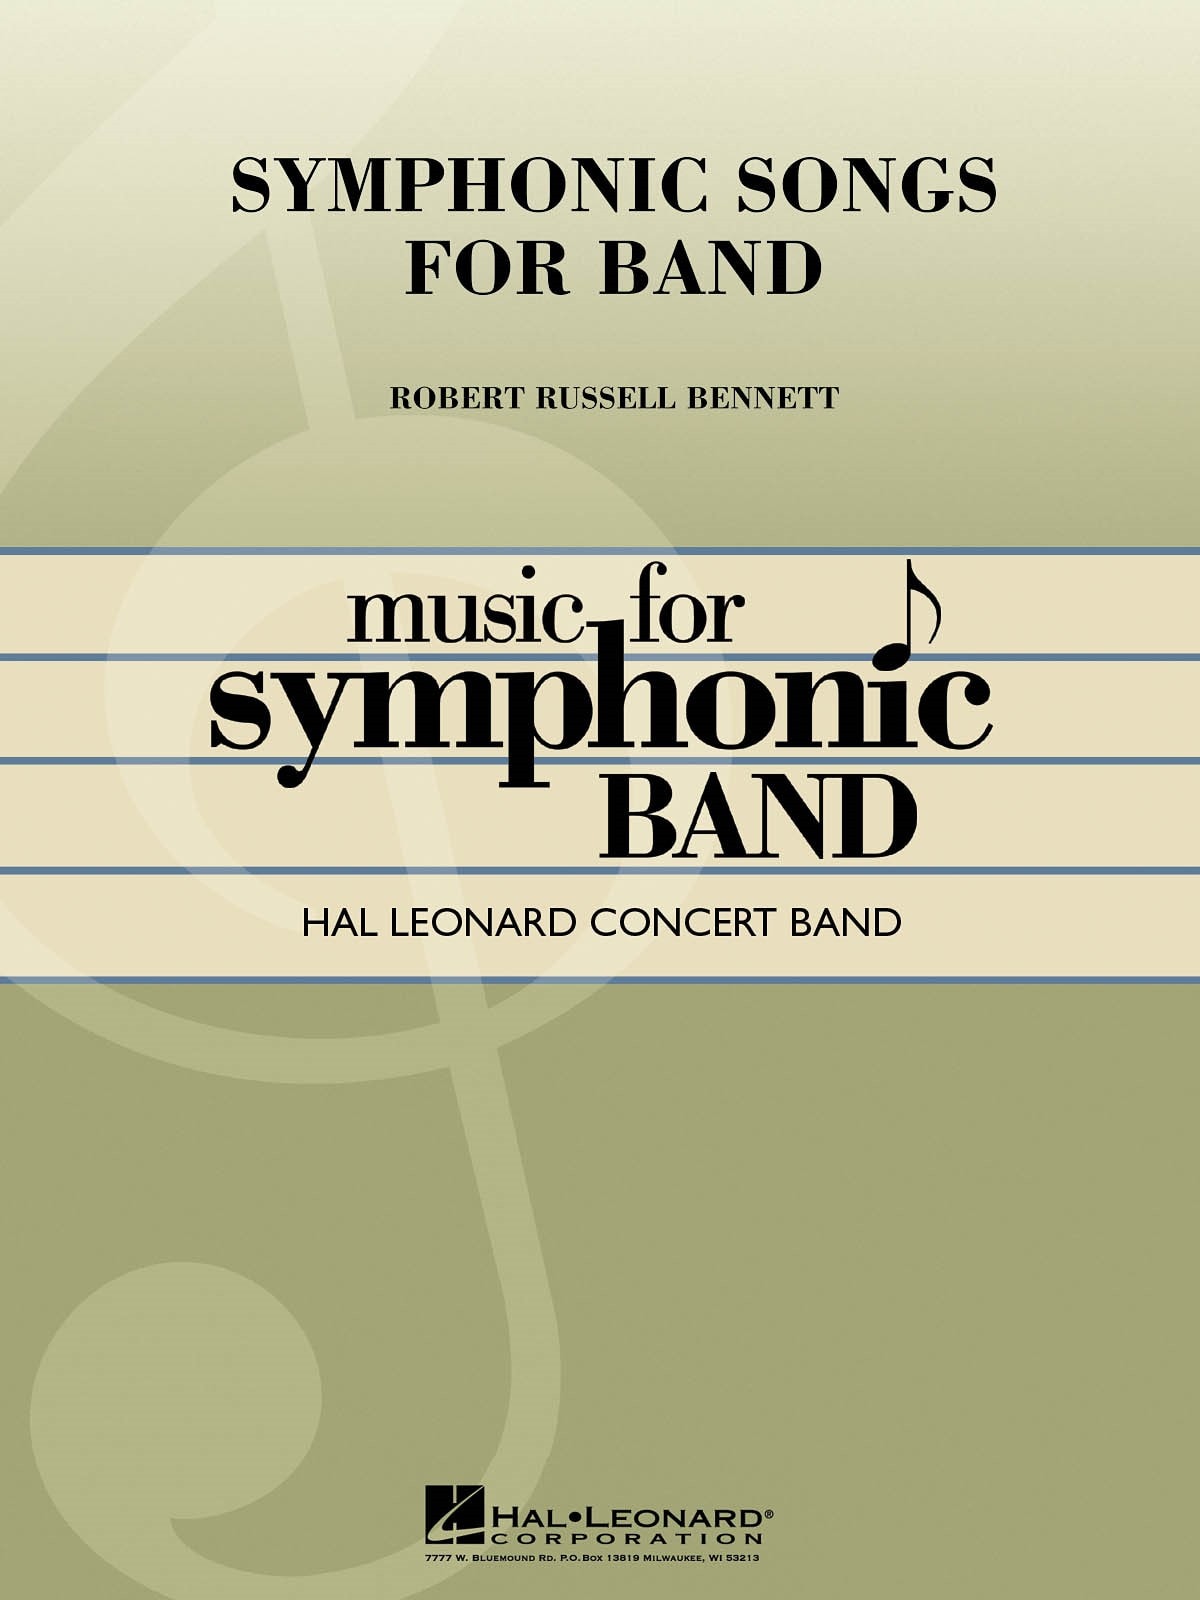 Symphonic Songs for Band (Deluxe Edition) for Concert Band published by Hal Leonard - Set (Score & Parts)